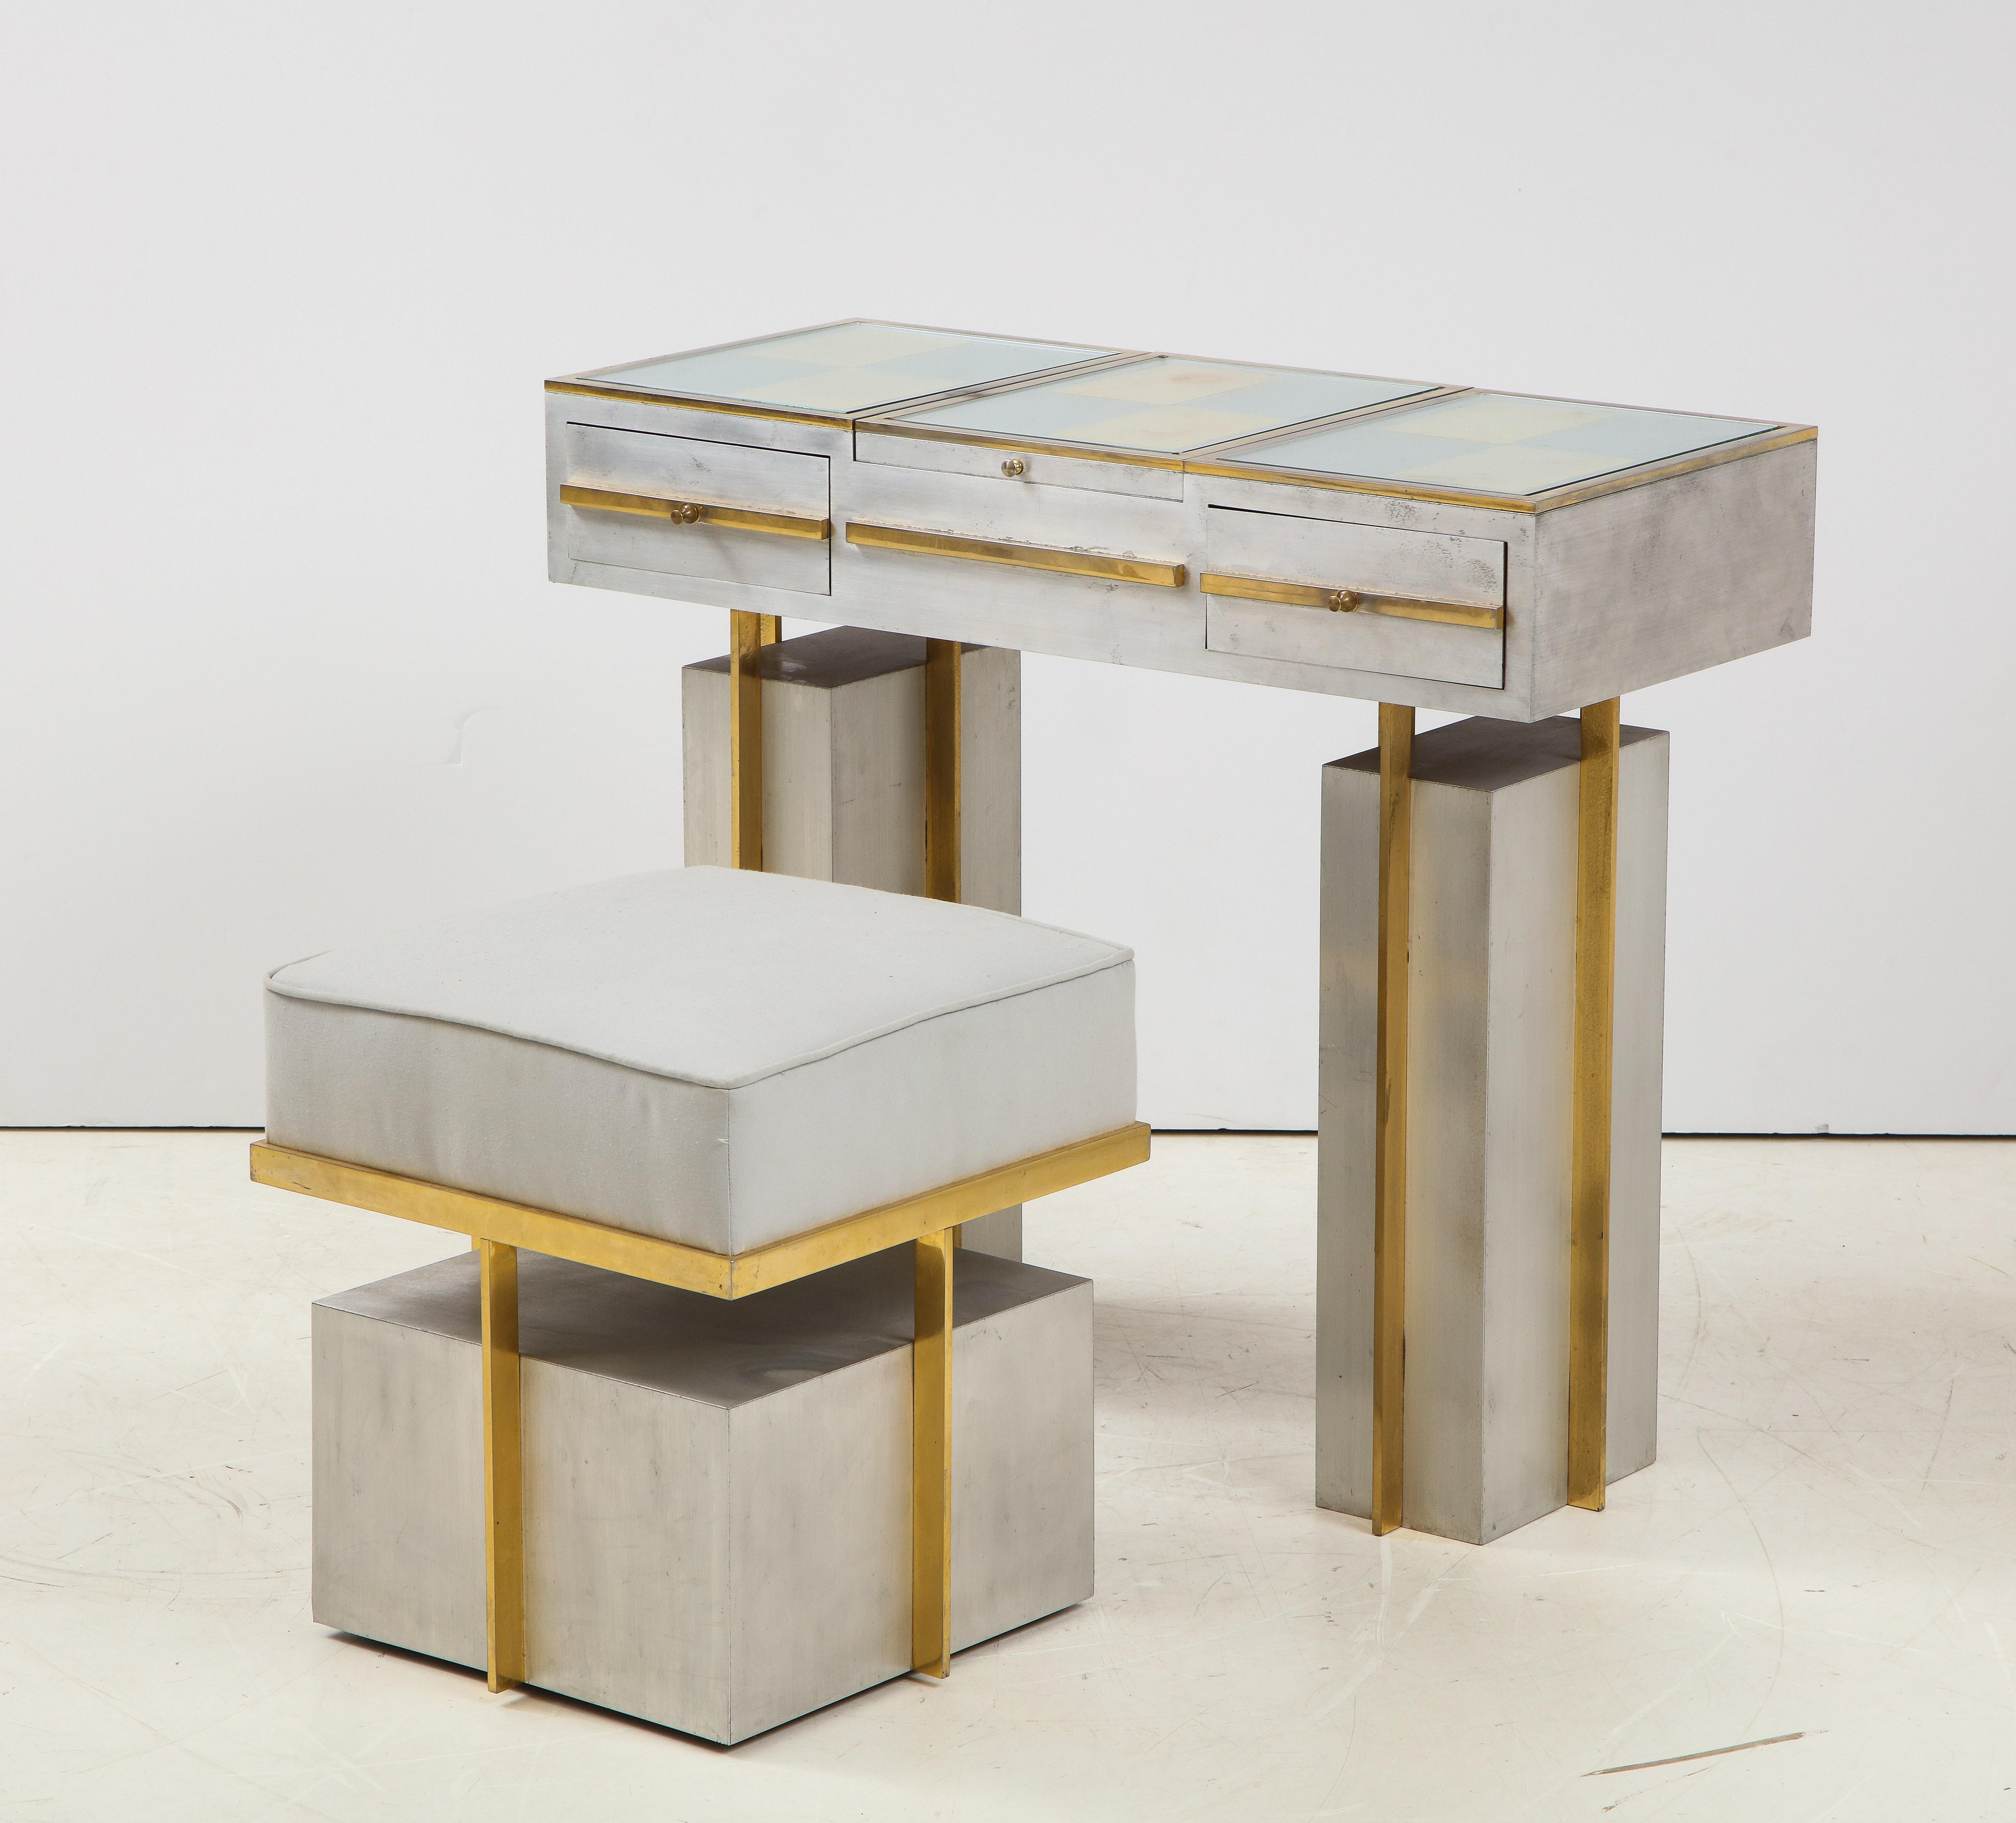 A stunning Geometric modernist style vanity and matching chair by Maison Jansen. This gem is in steel and brass brings a streamline deco look to a seventies jewel. A flip top reveals a concealed mirror and compartment. The stool fits neatly under it